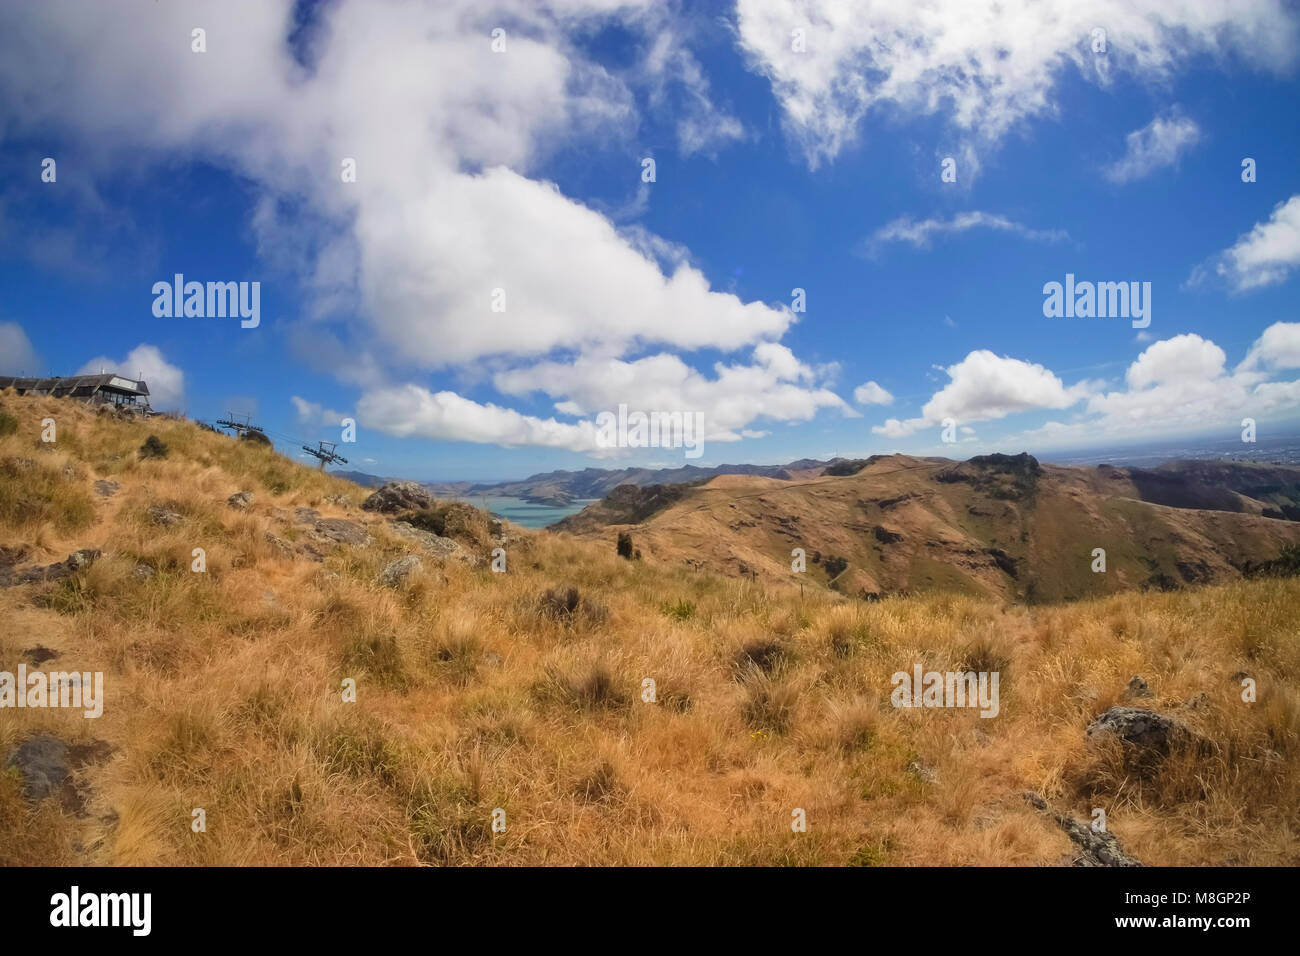 Beautiful scenery from Christchurch Gondola Station at the top of Port Hills, Christchurch, Canterbury, New Zealand. Stock Photo